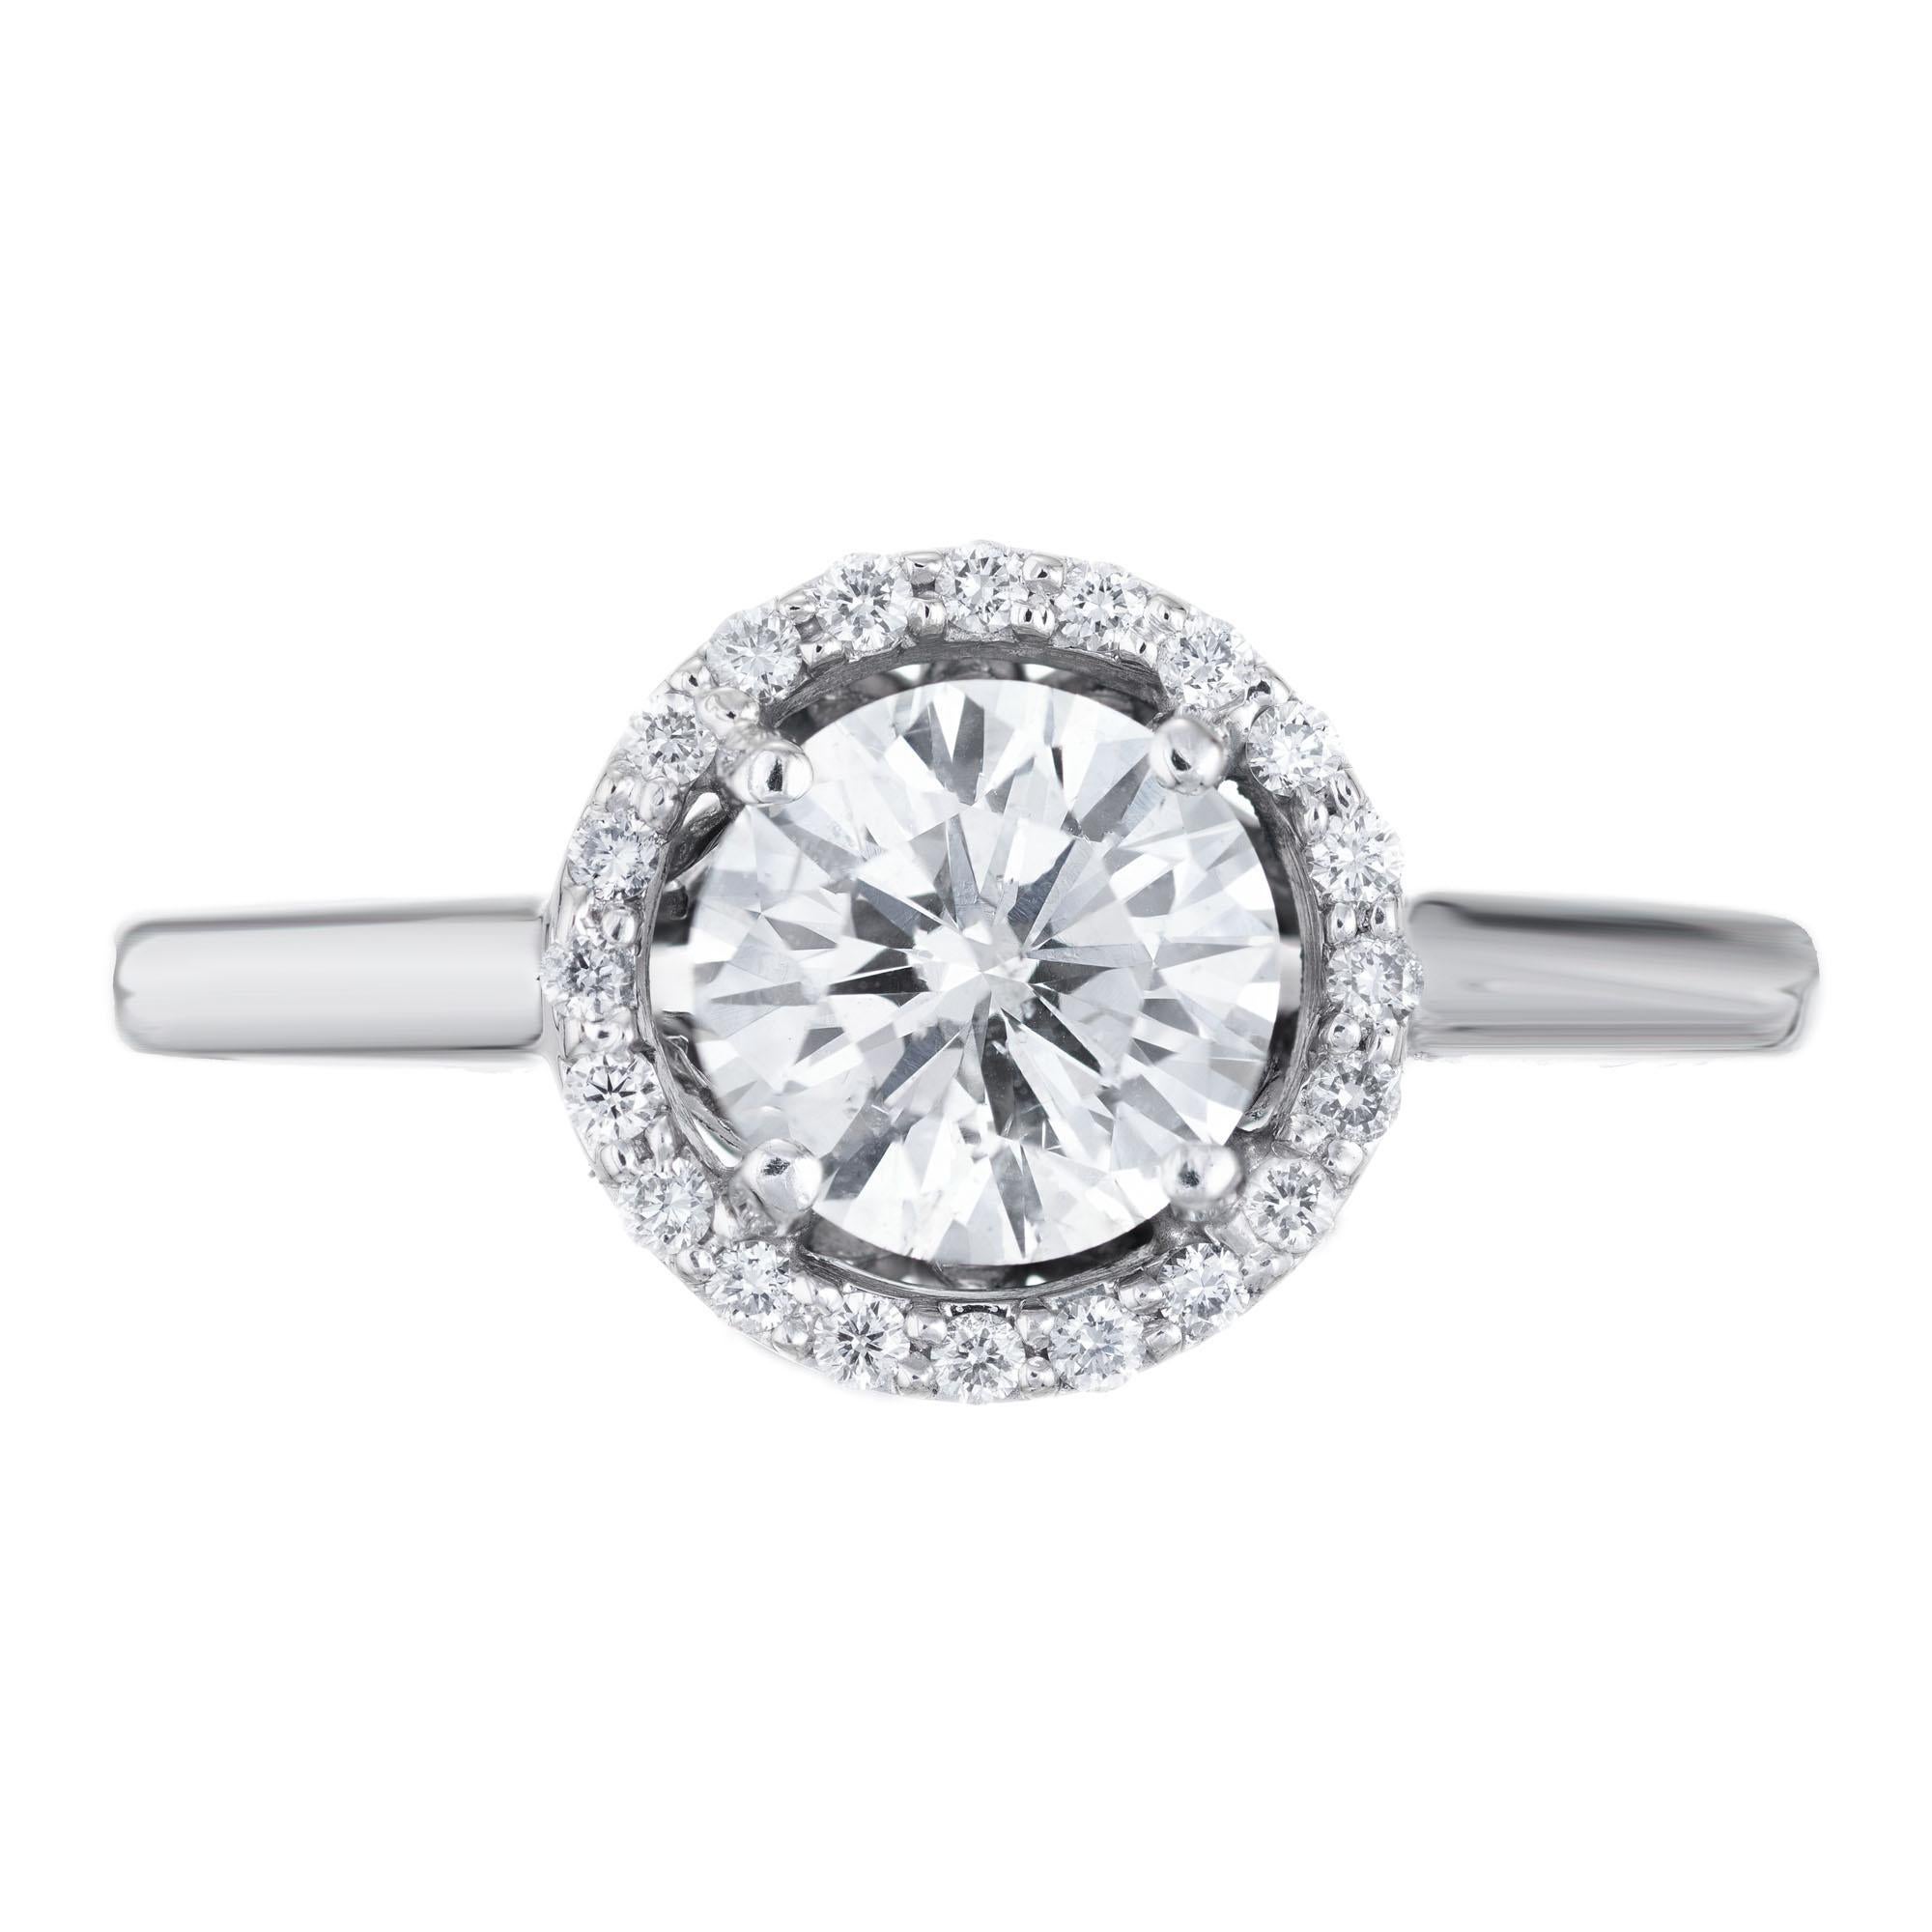 EGL certified round diamond center stone in a 14k white gold setting with a halo of 22 round ideal cut diamonds. 

1 Ideal round brilliant cut diamond, approx. total weight 1.00cts, I to J, SI2, eye clean, 6.37 x 6.35 x 3.85mm, Depth: 60.5%, Table: